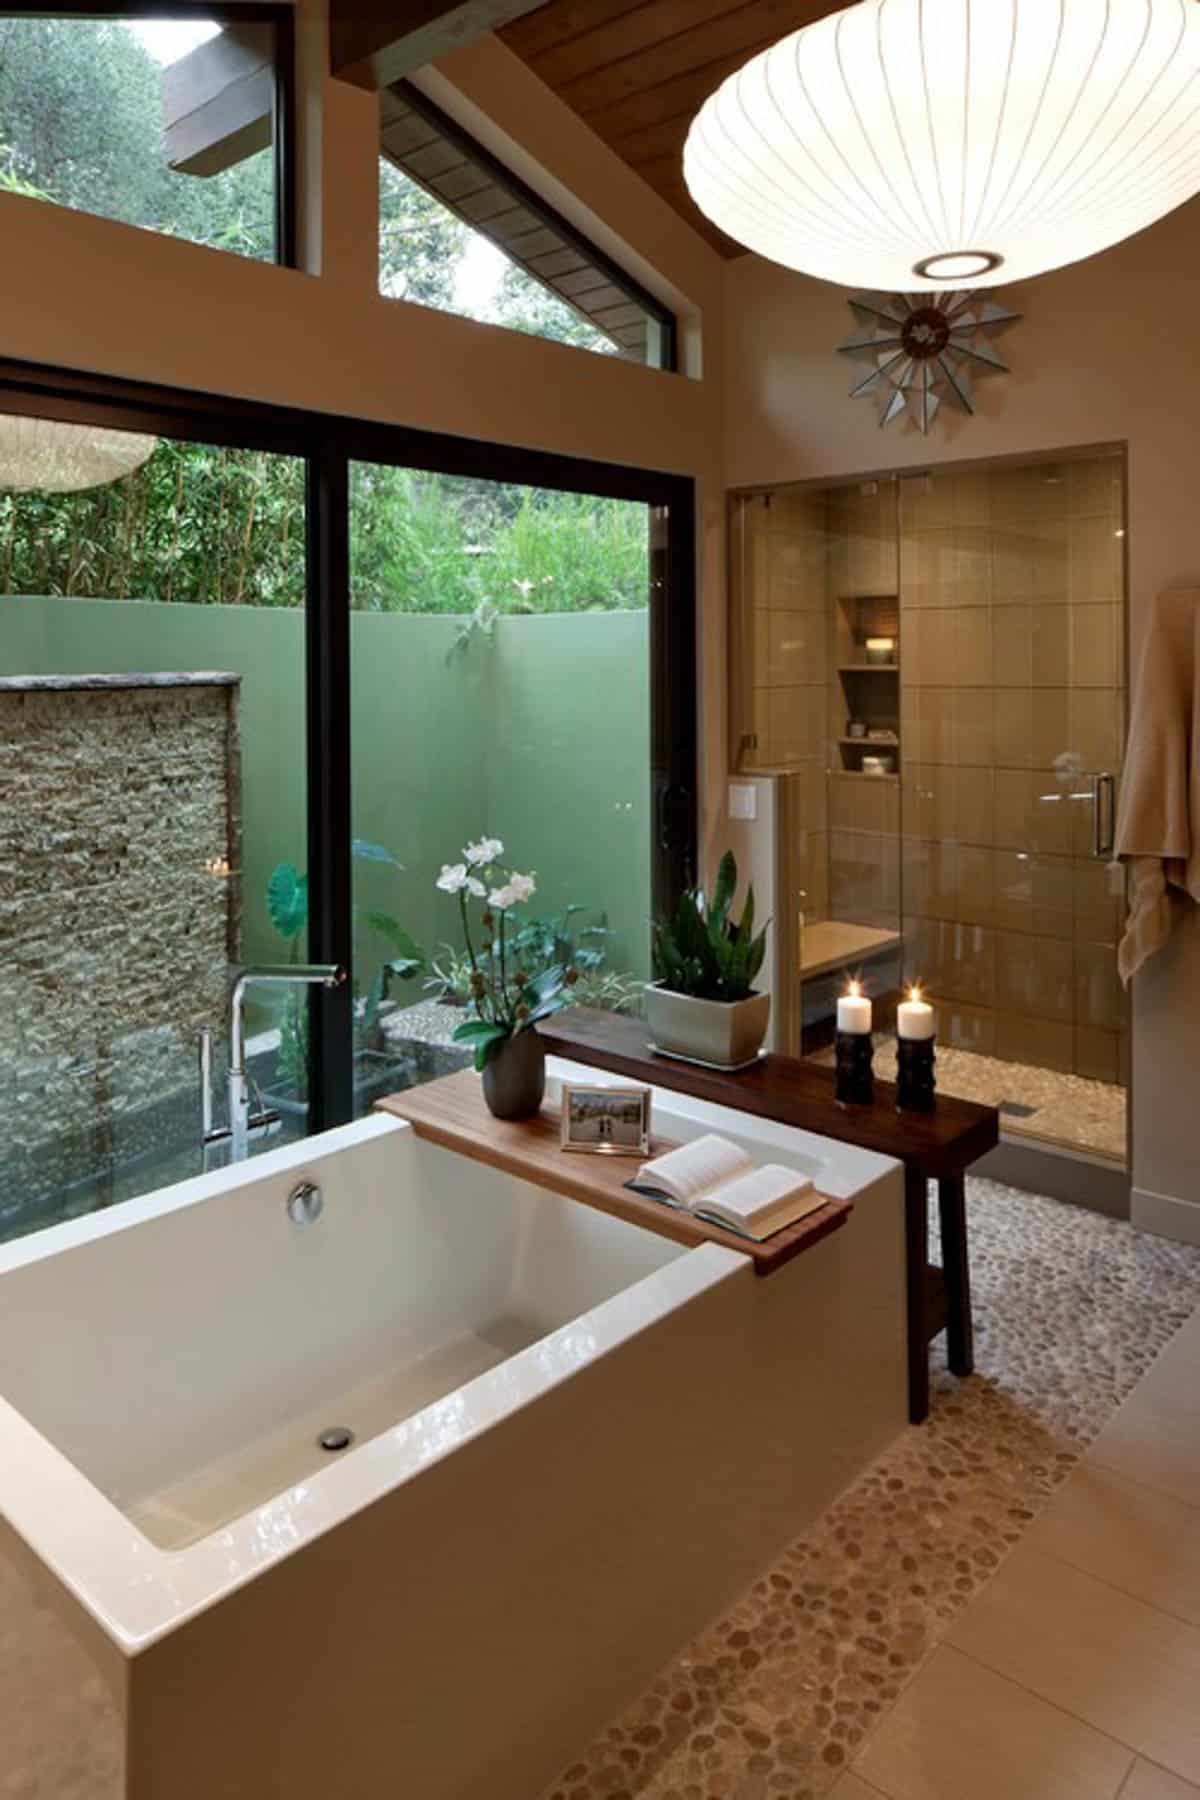 almond bathtub and neutral colors in bathroom